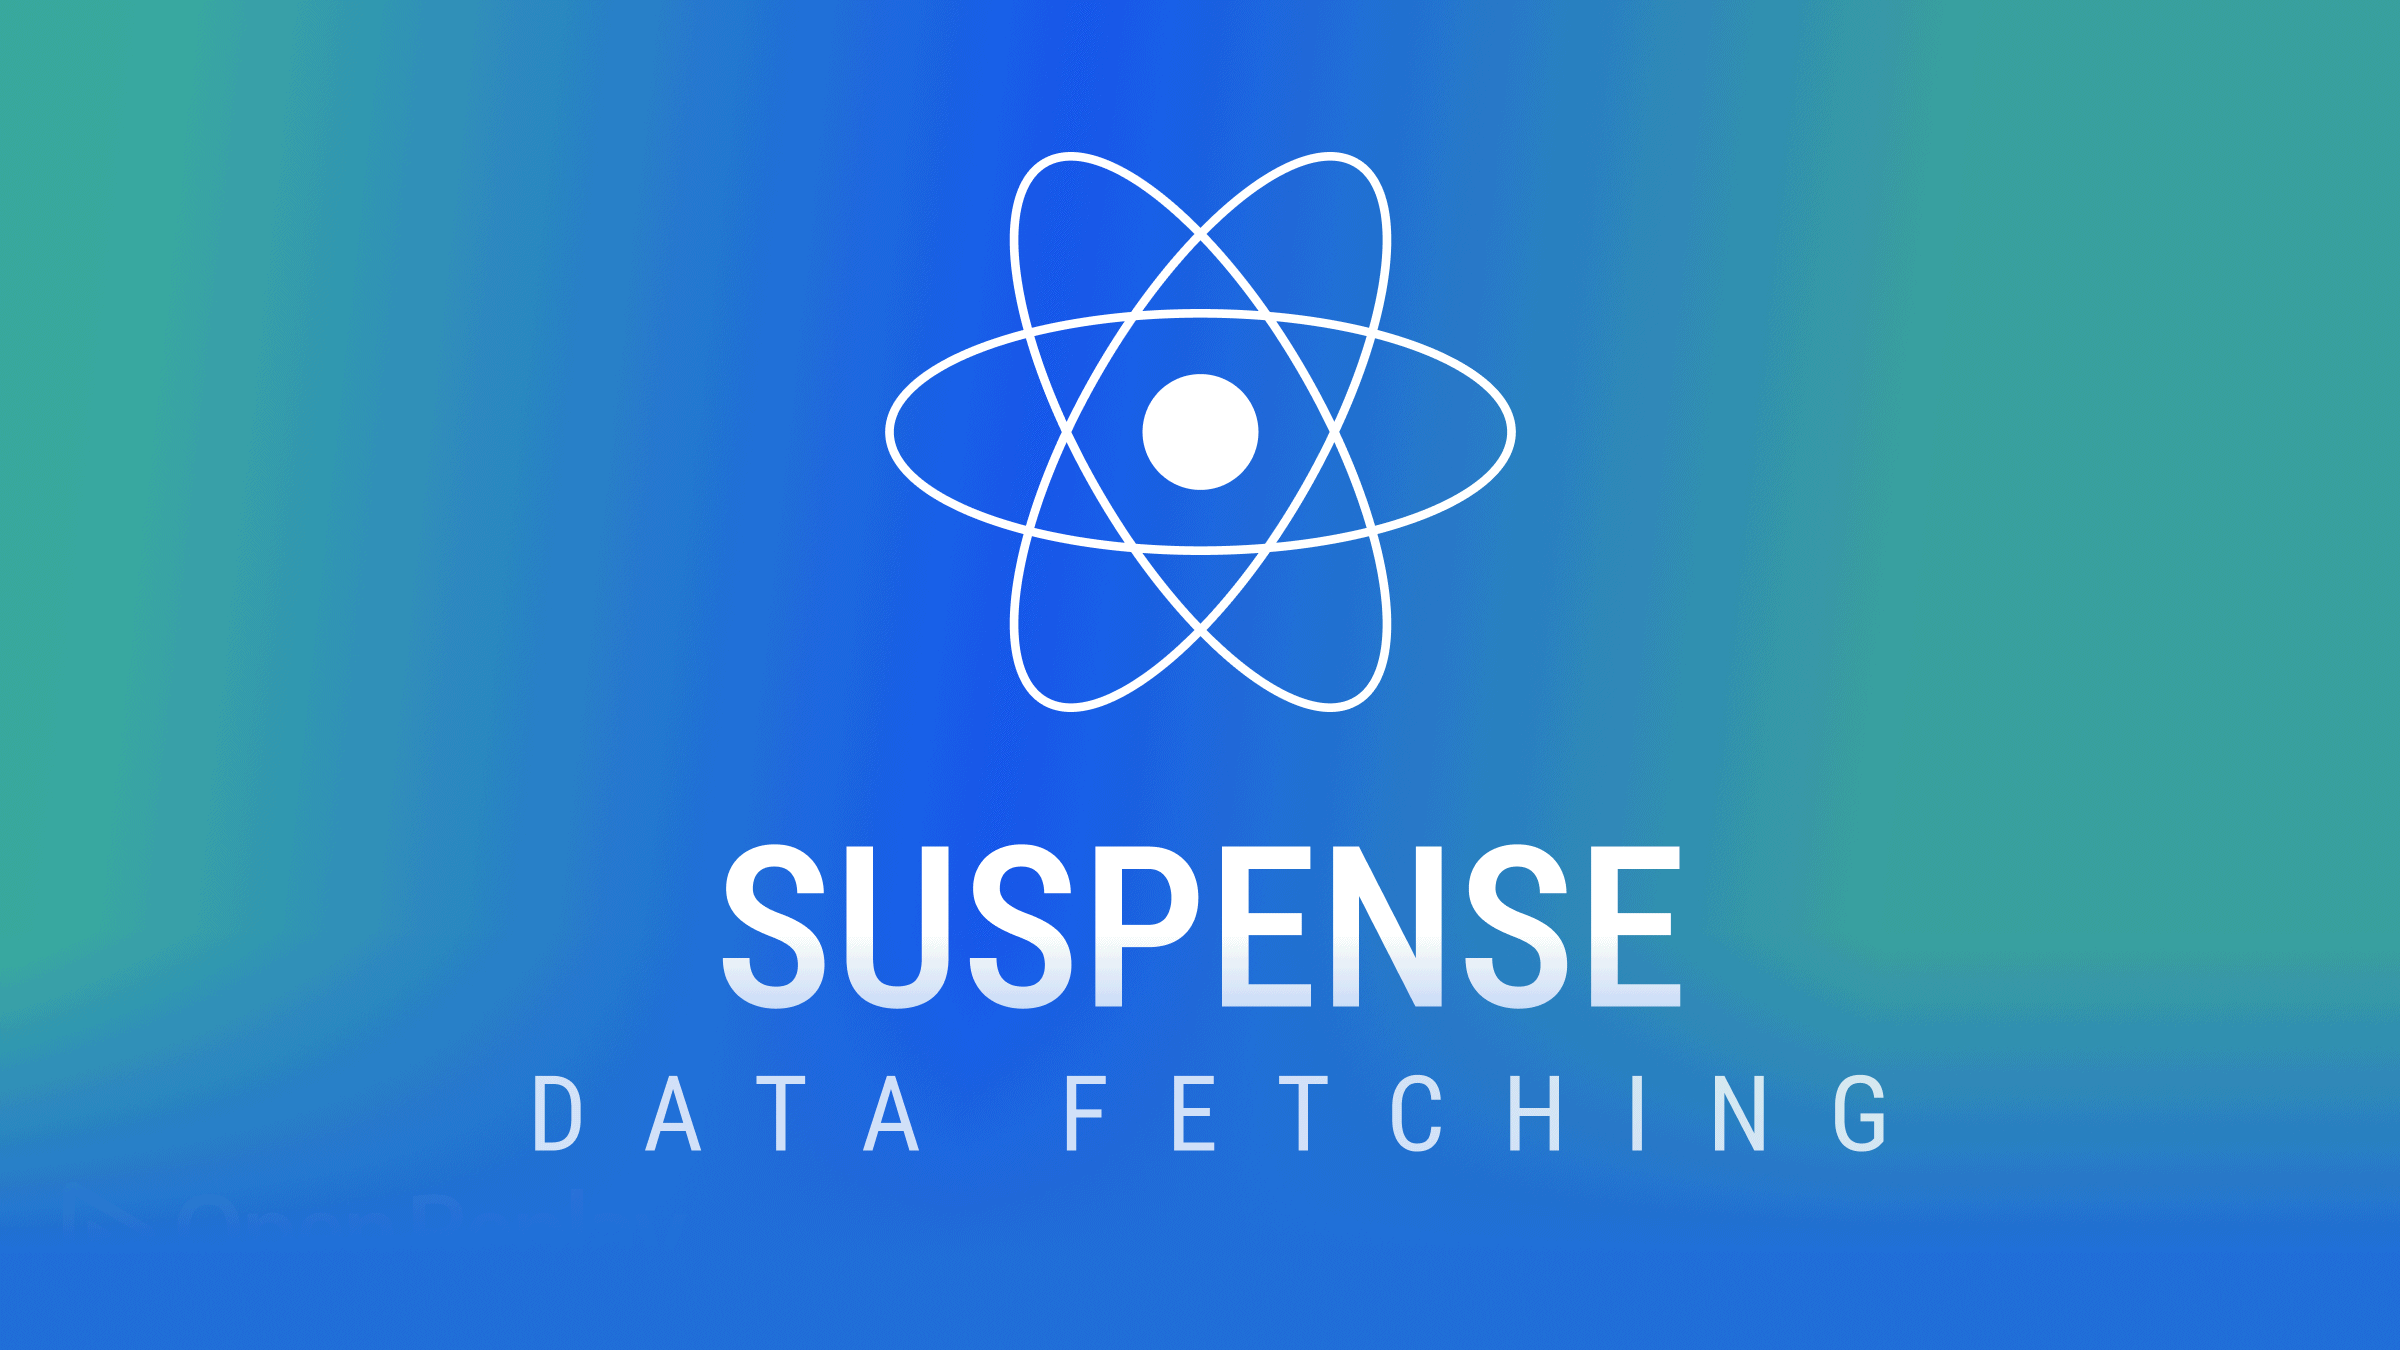 Data fetching with Suspense in React